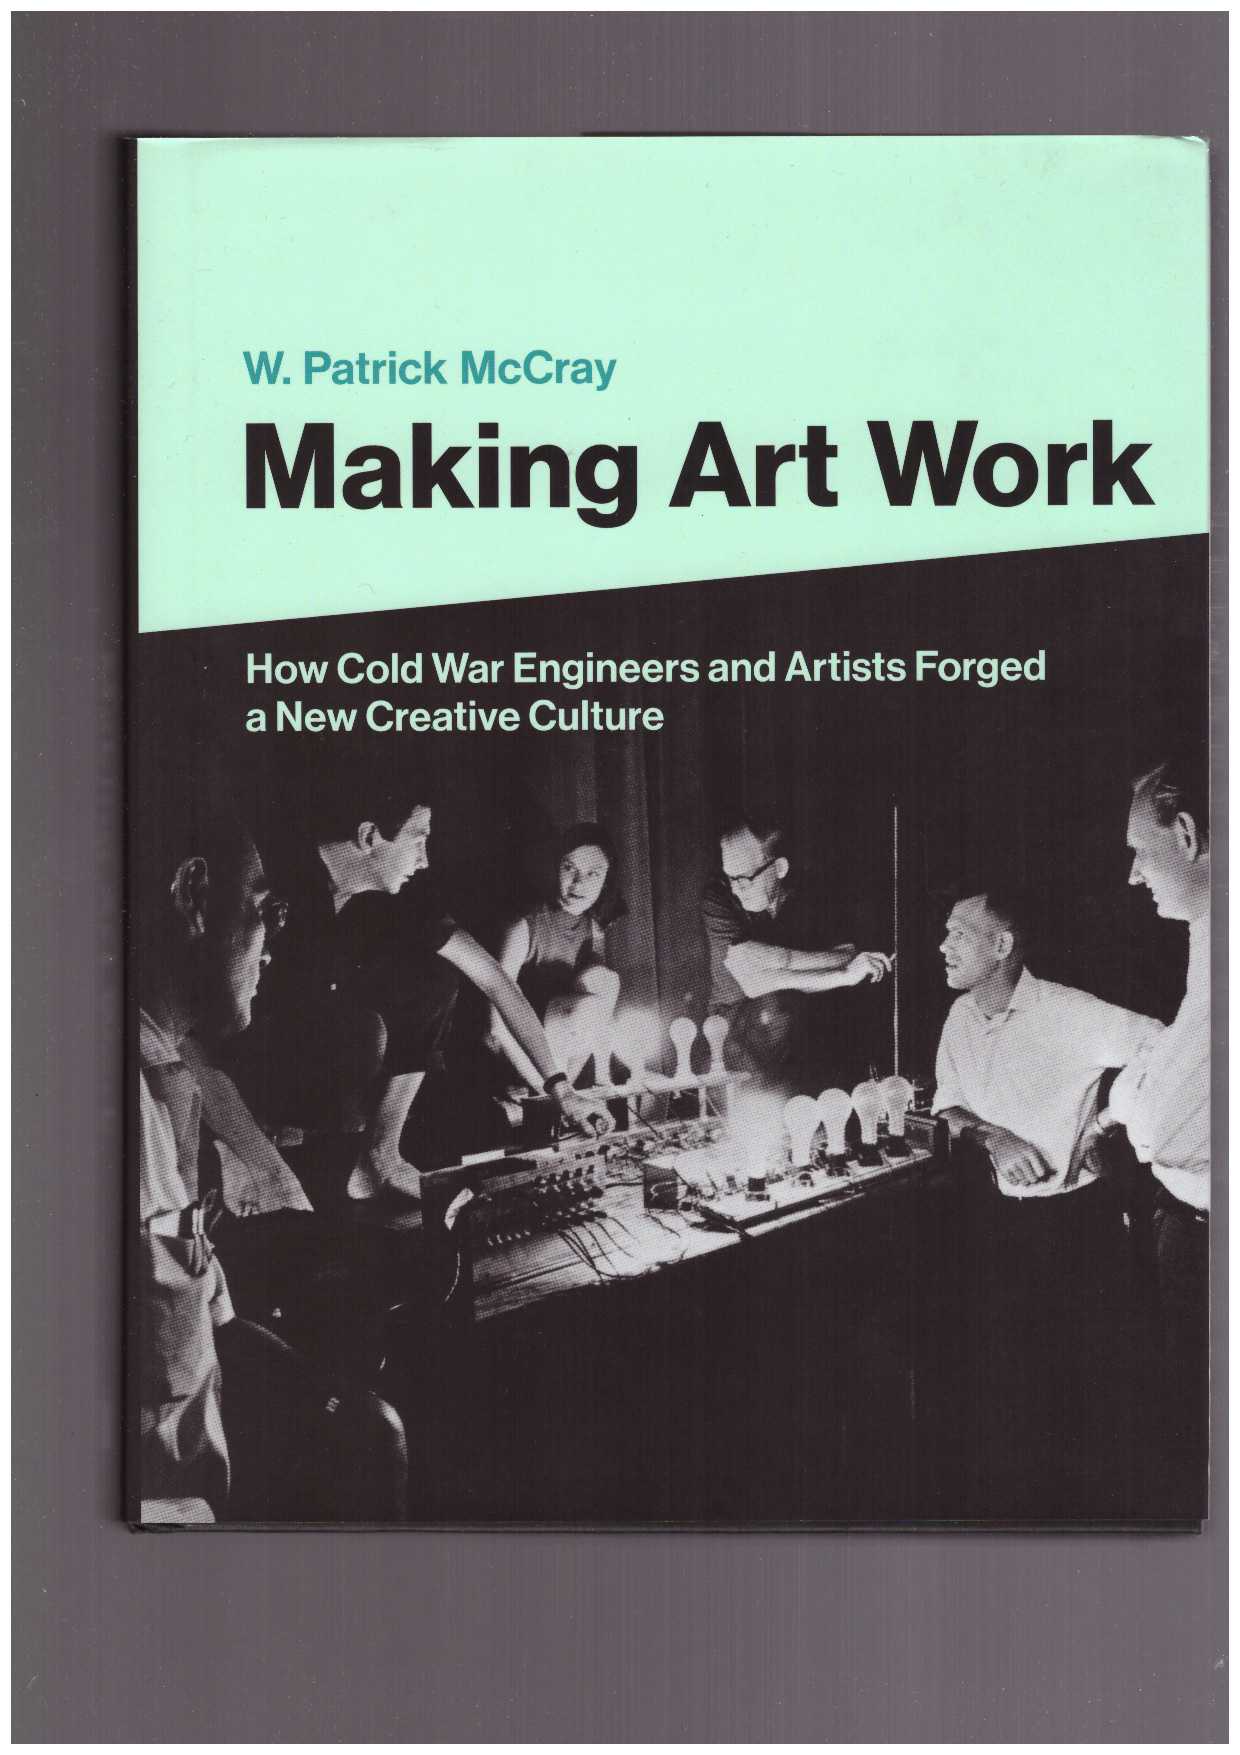 McCRAY, W. Patrick  - Making Art Work. How Cold War Engineers and Artists Forged a New Creative Culture